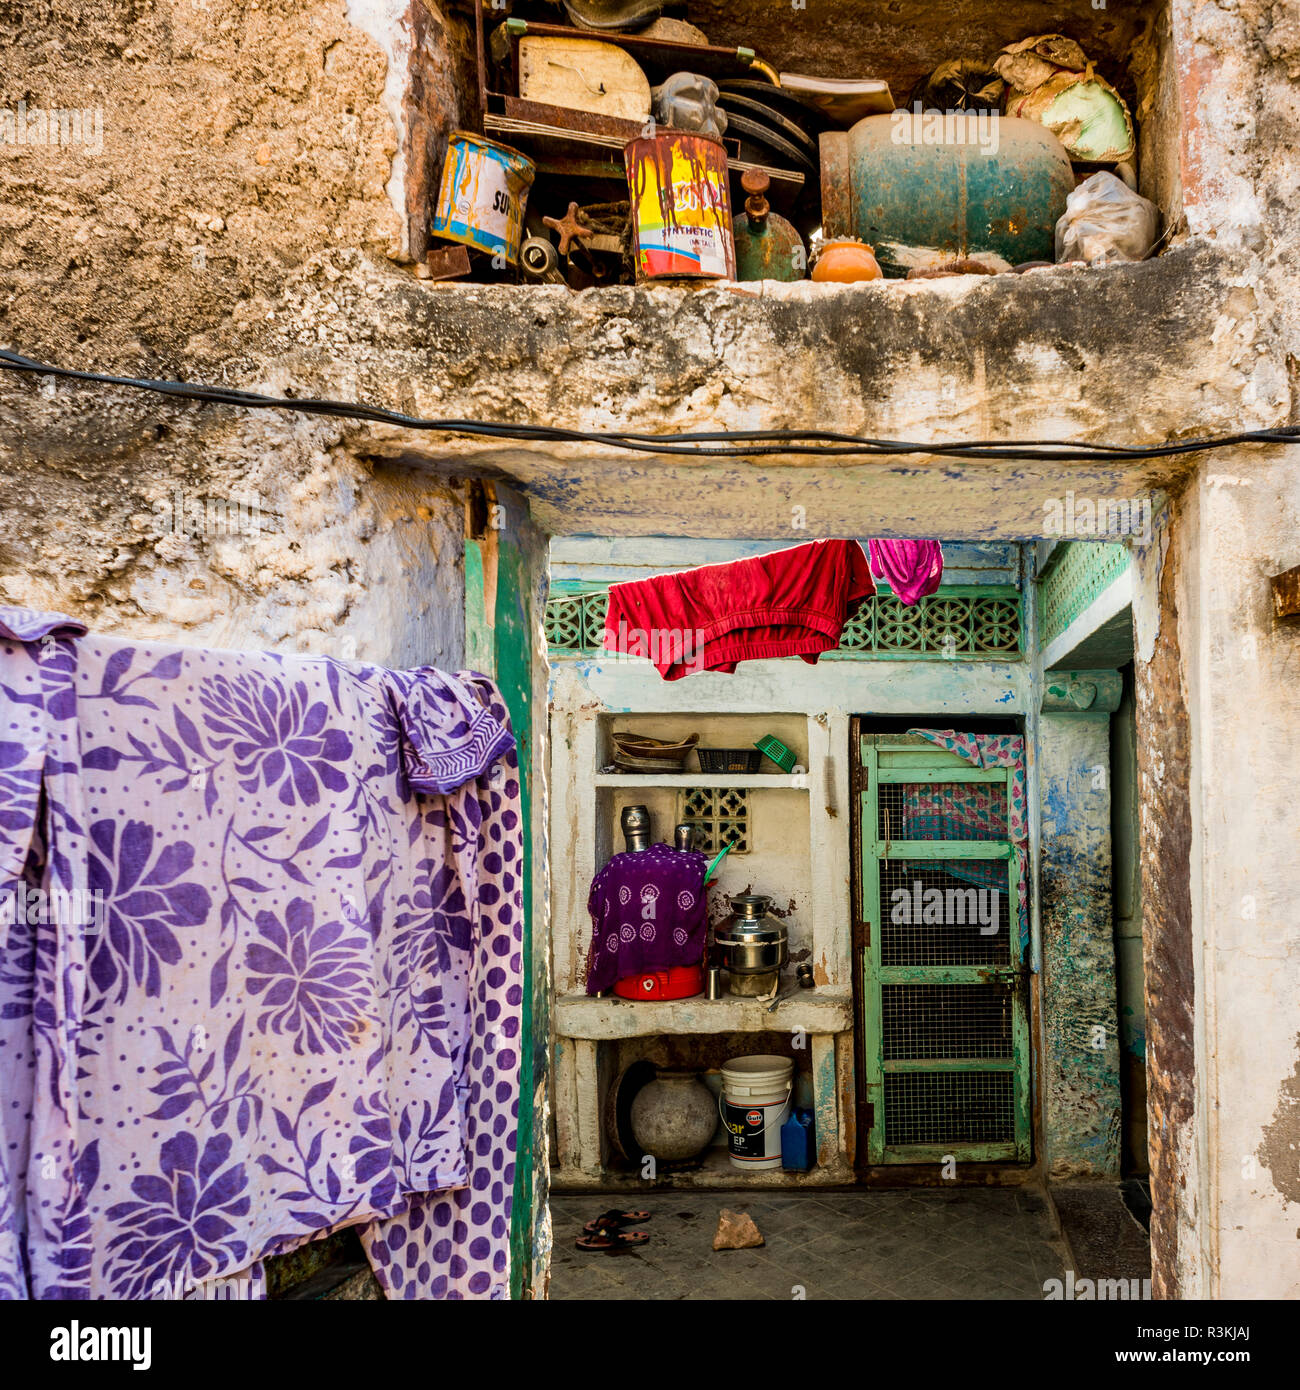 India, Rajasthan, Pipar. No Water No Life expedition, typical home interior Stock Photo